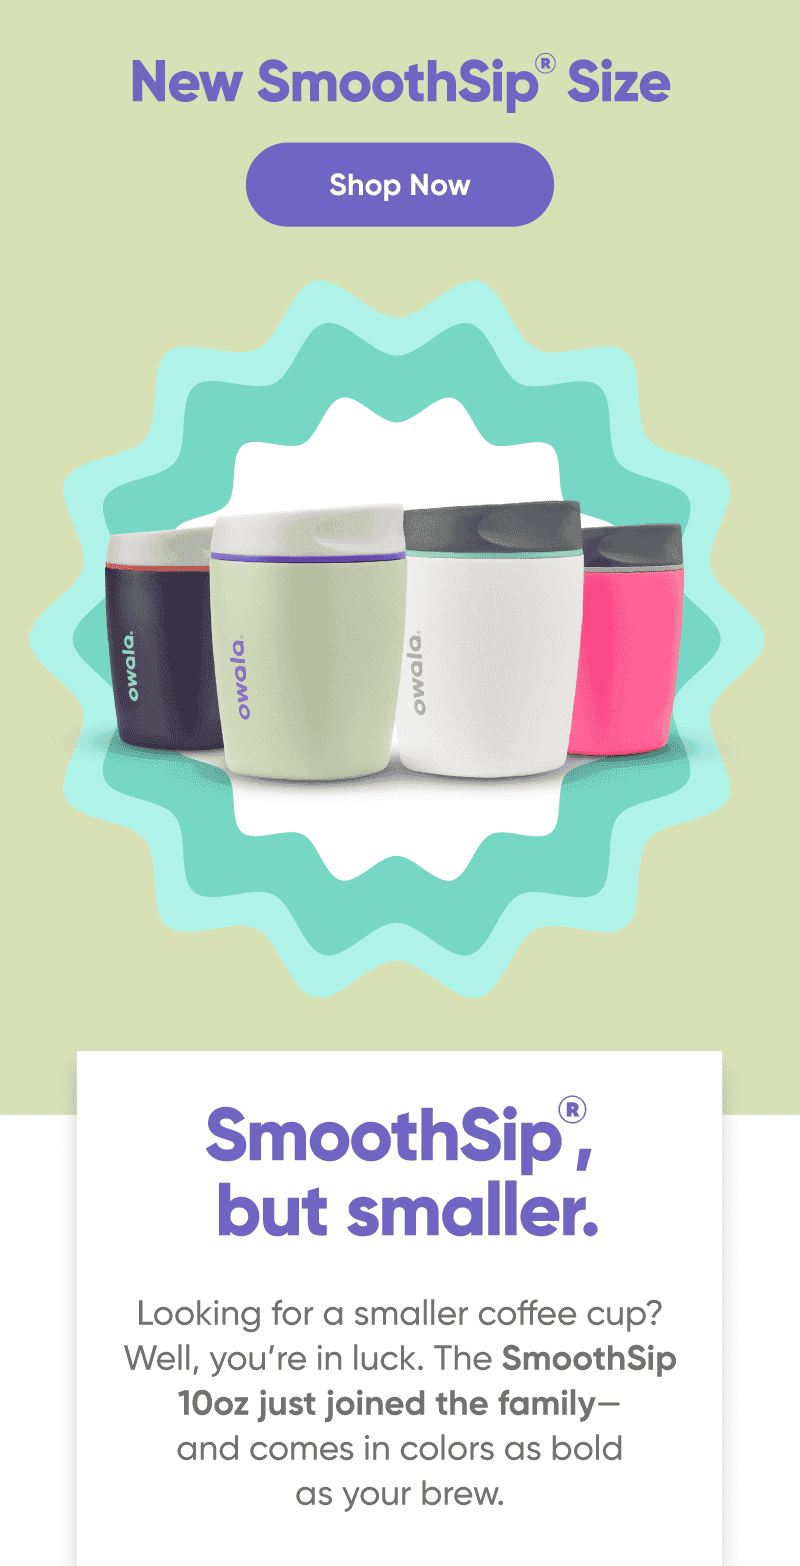 New SmoothSip Size. Shop Now.SmoothSip, but smaller.\xa0 Looking for a smaller coffee cup? Well, you’re in luck. The SmoothSip 10oz just joined the family—and comes in colors as bold as your brew.